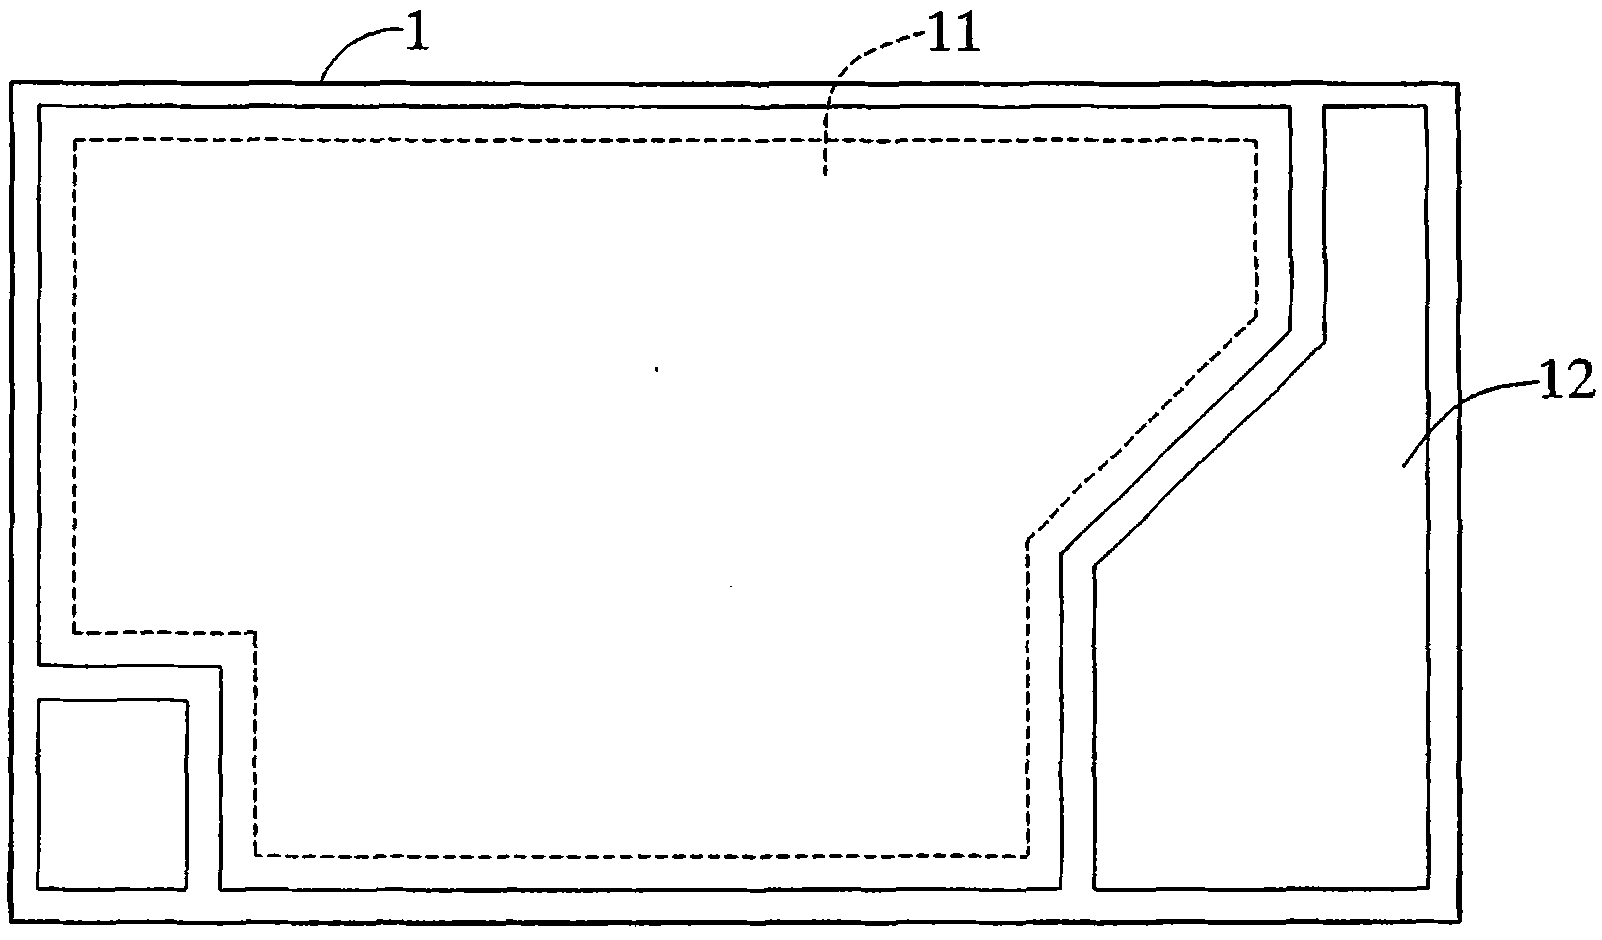 Method for manufacturing printed circuit board (PCB)